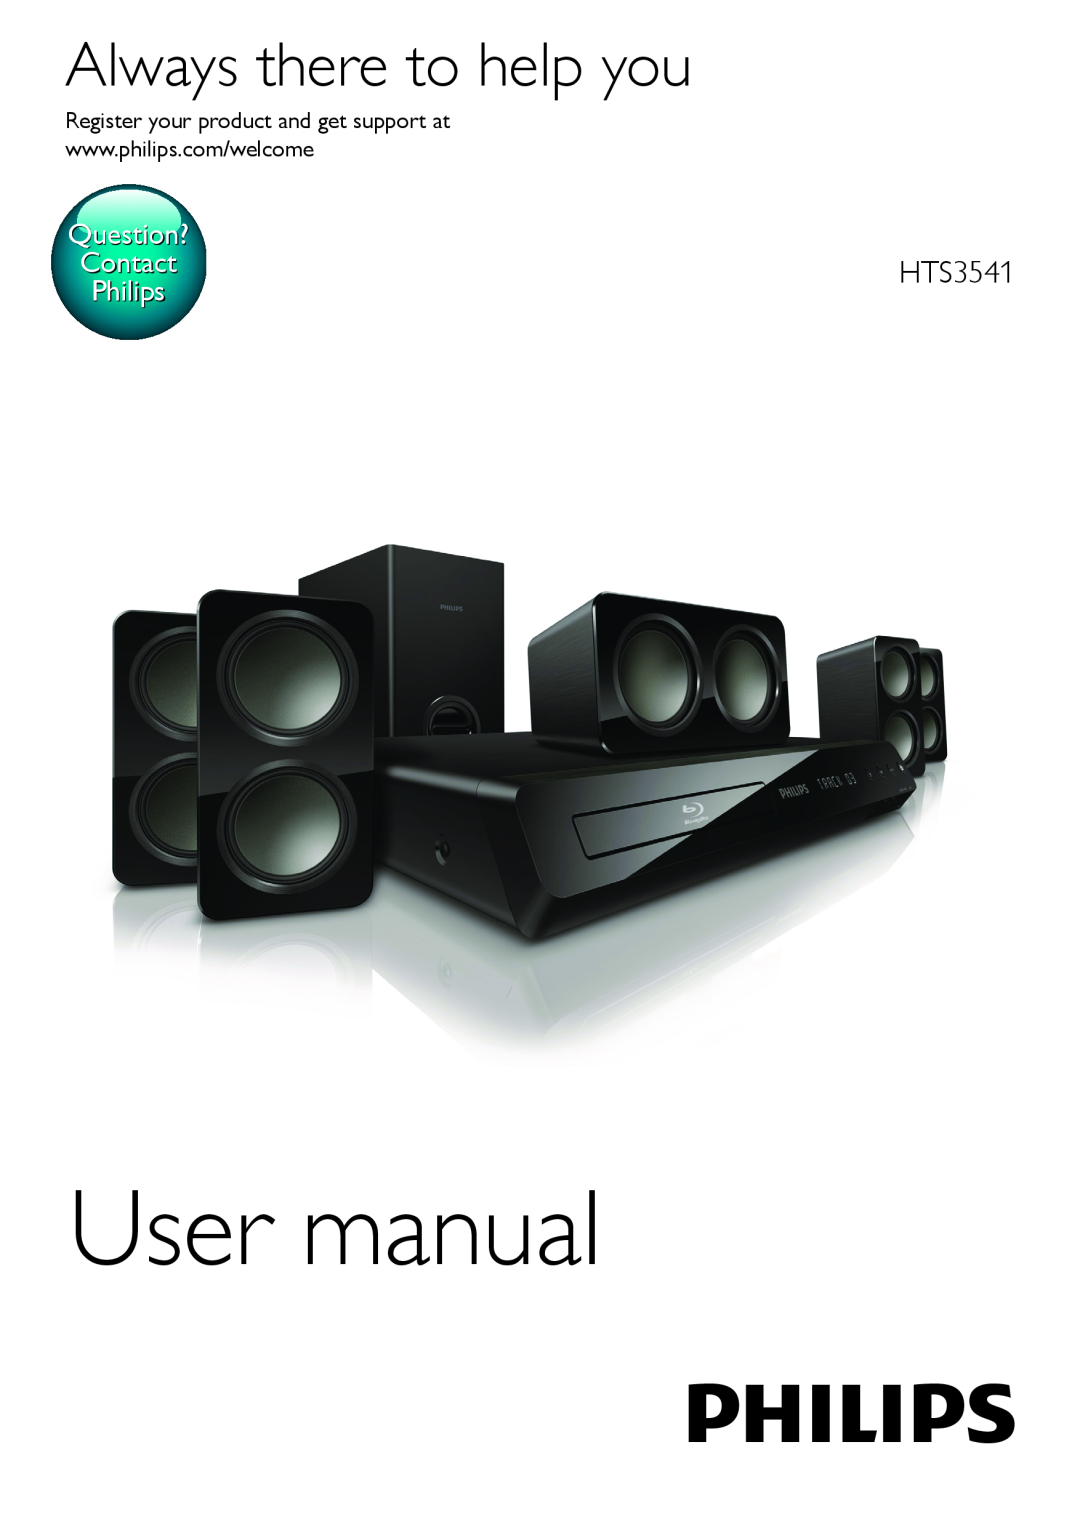 Philips user manual Always there to help you, Question? ContactHTS3541 Philips 